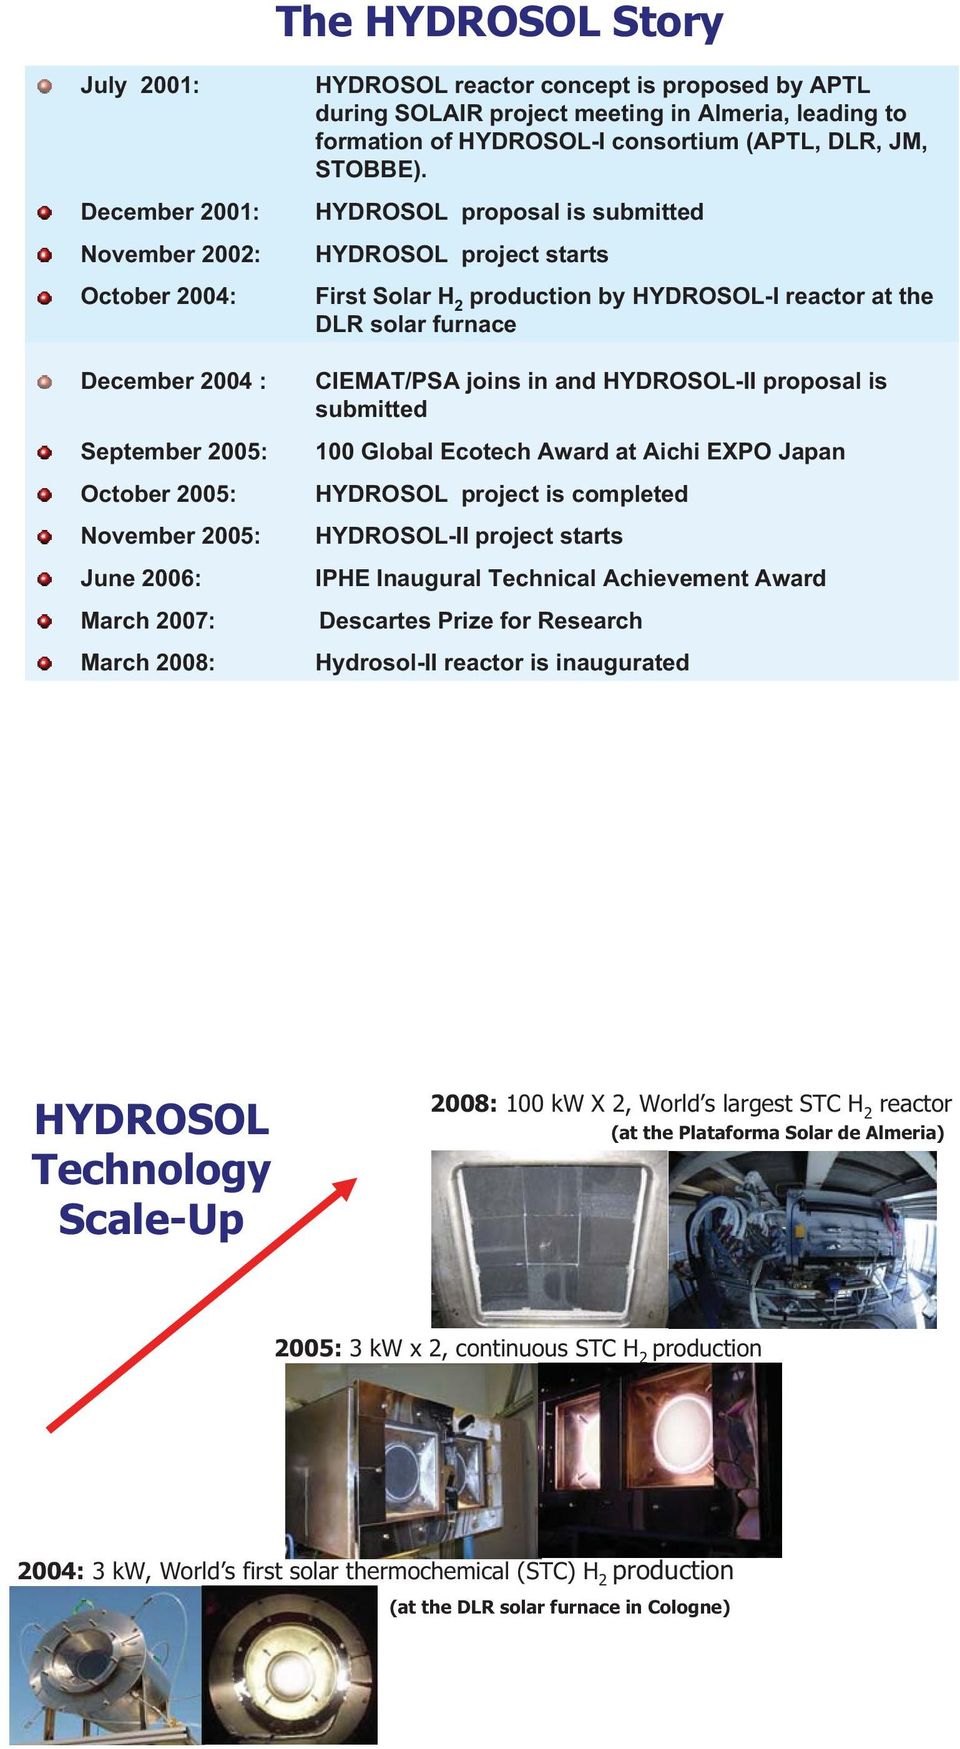 HYDROSOL proposal is submitted HYDROSOL project starts First Solar H 2 production by HYDROSOL-I reactor at the DLR solar furnace CIEMAT/PSA joins in and HYDROSOL-II proposal is submitted 100 Global